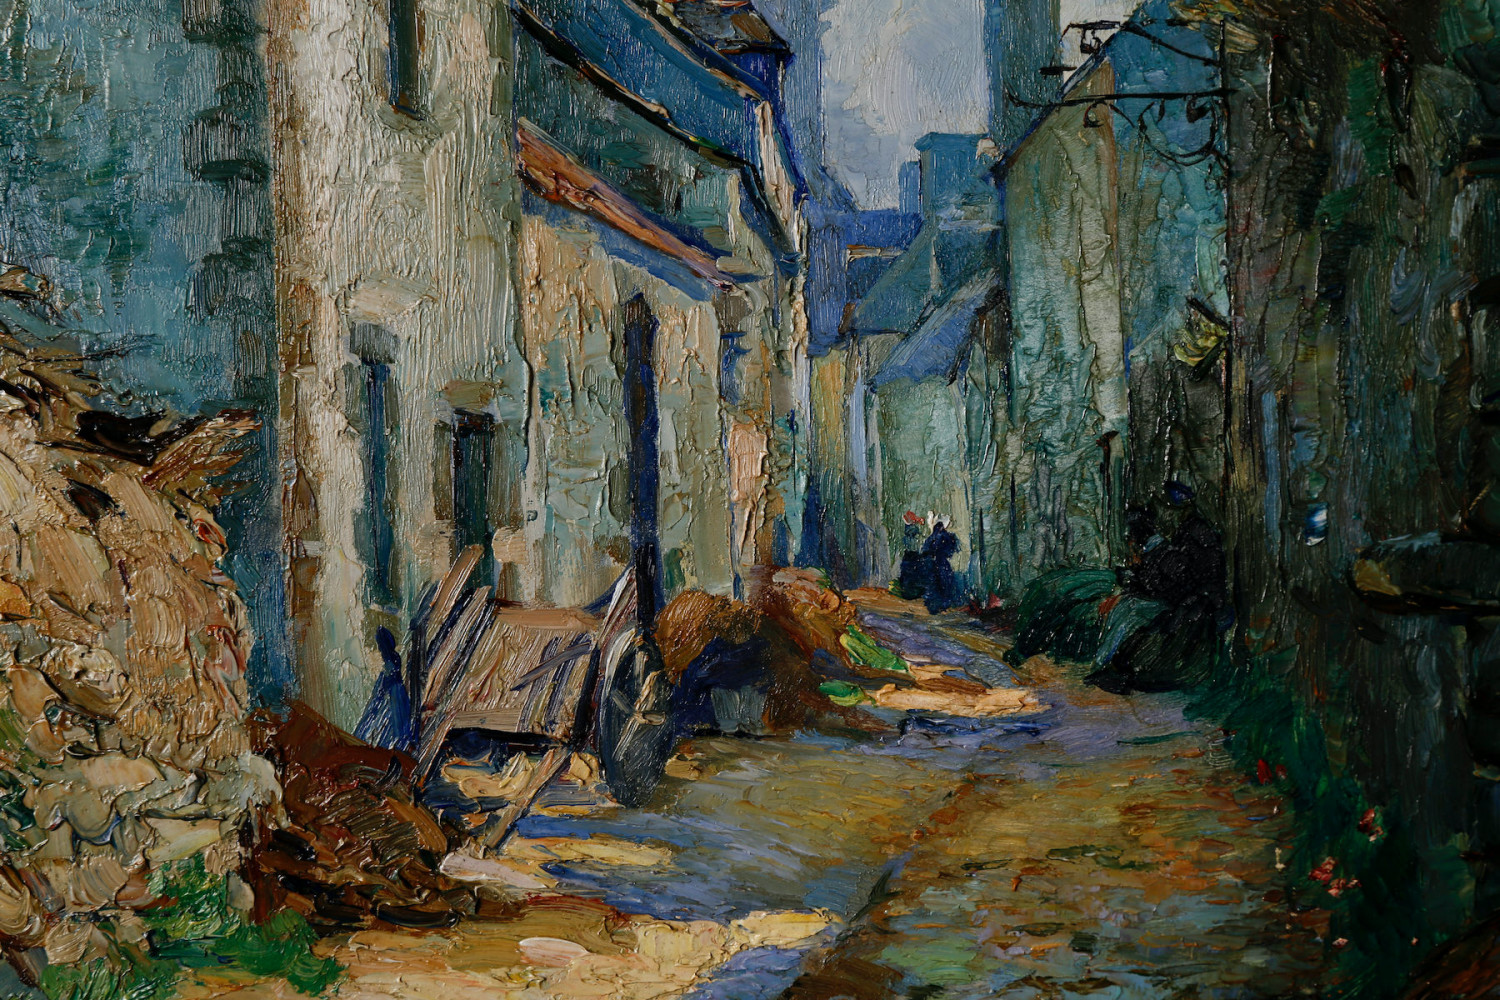 Narrow Street, Finistere, France by Abel G. Warshawsky